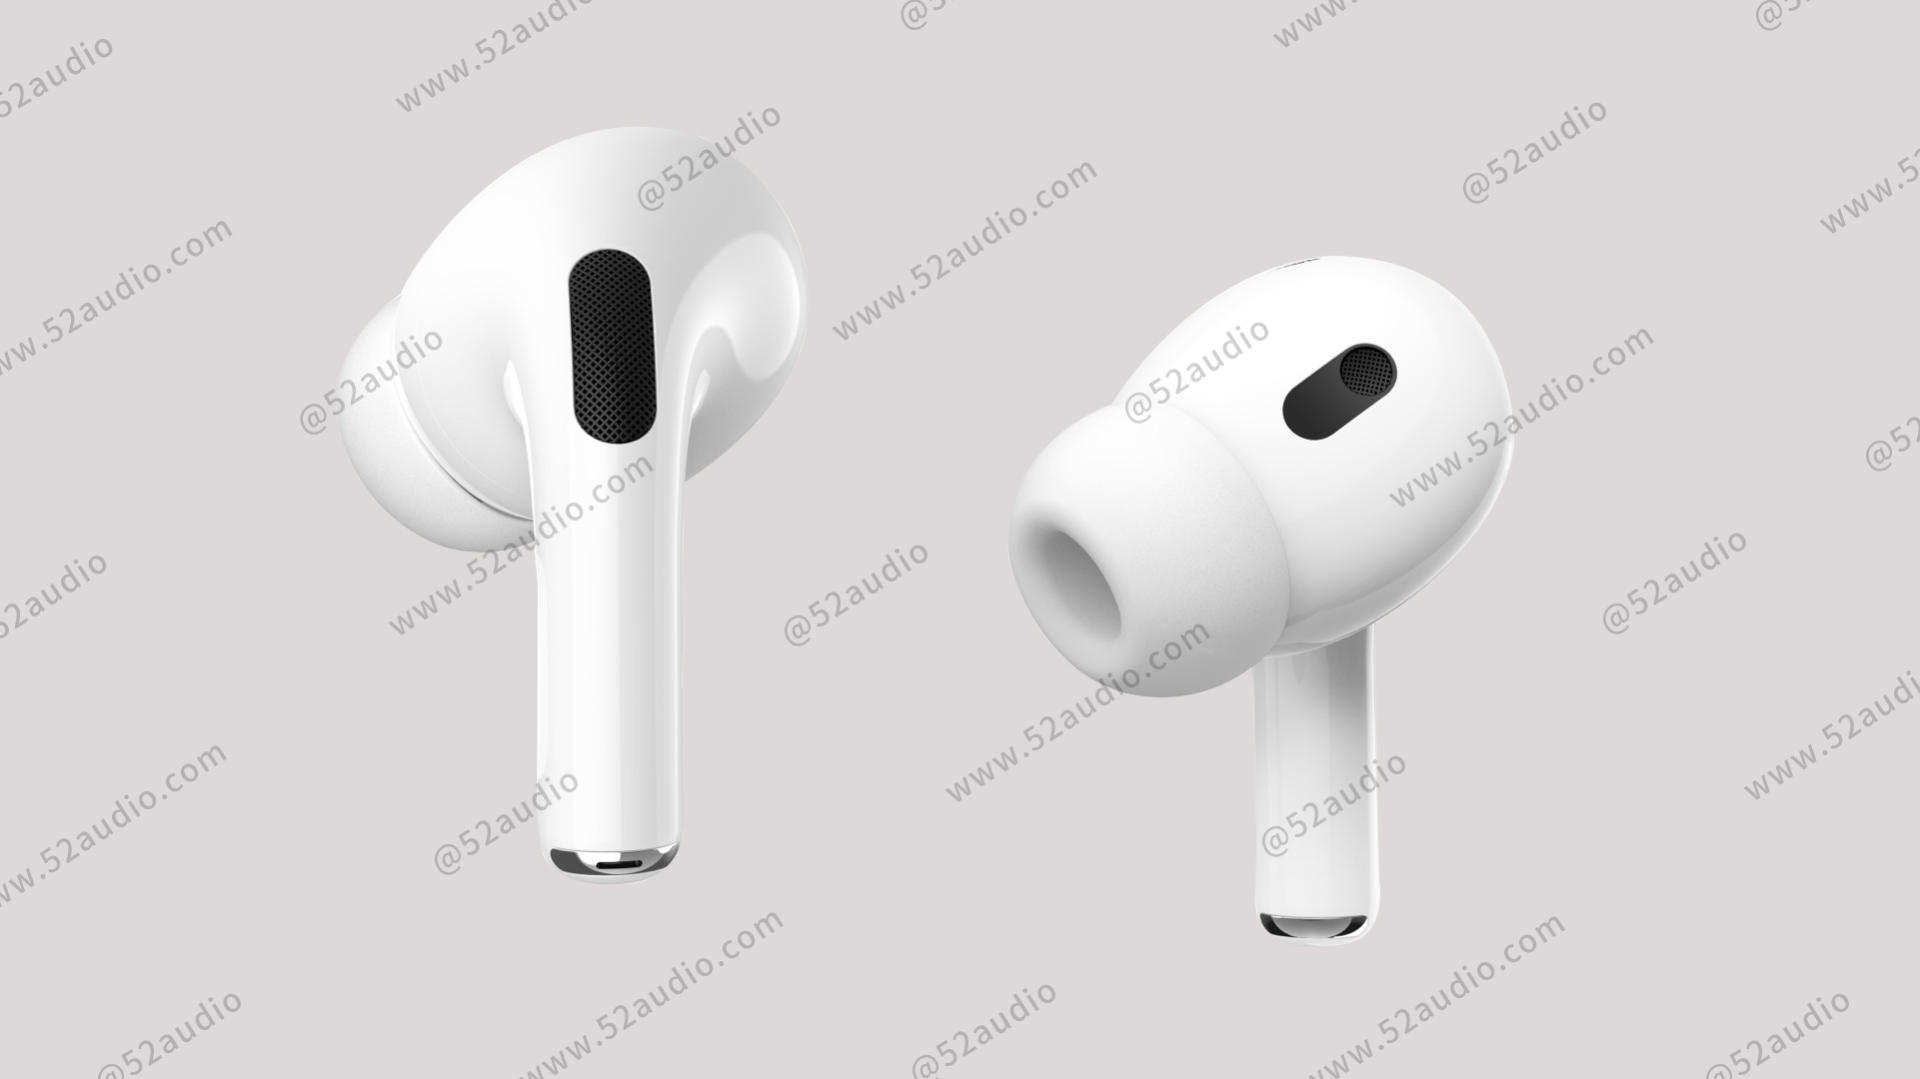 AirPods 4, AirPods Pro 2, and AirPods Max 2: Here are the latest rumors on when to expect them